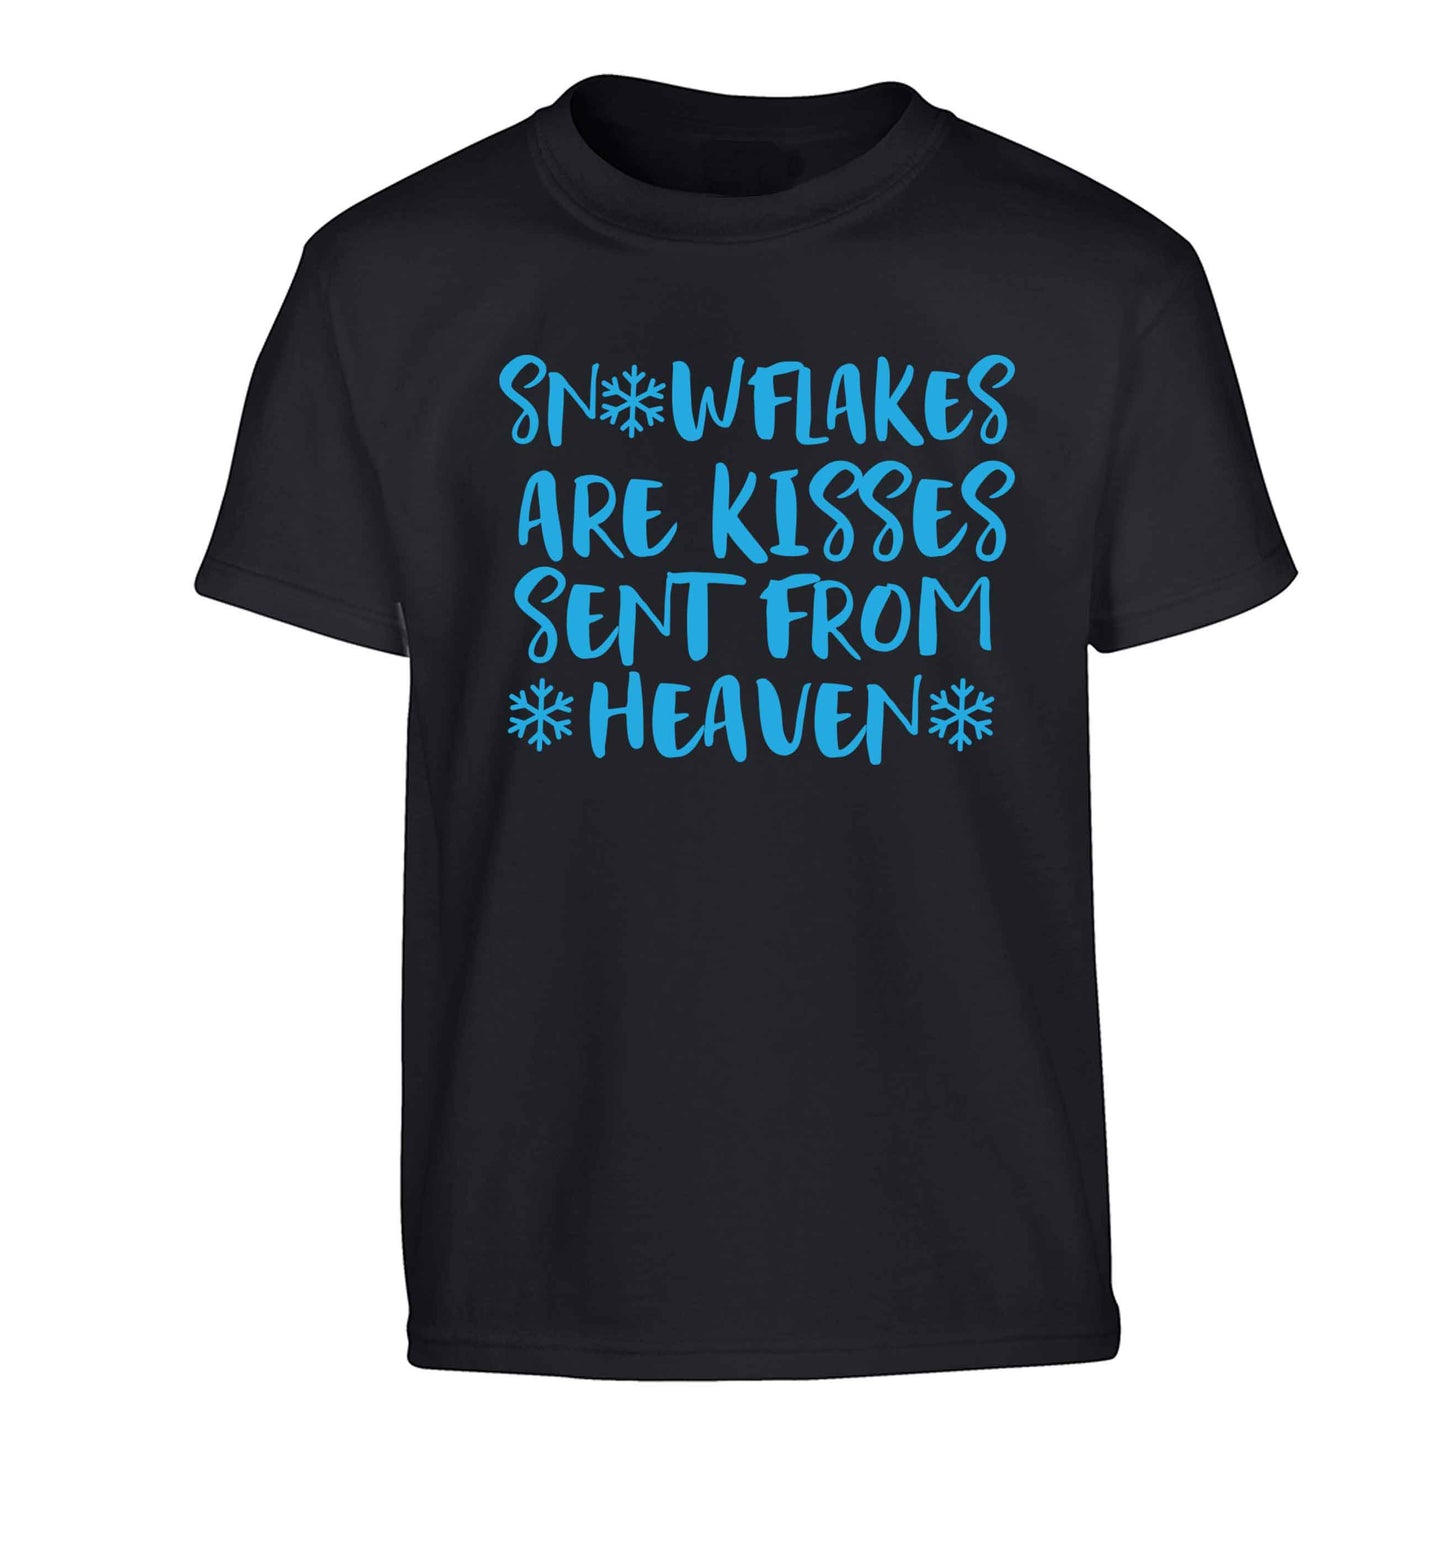 Snowflakes are kisses sent from heaven Children's black Tshirt 12-13 Years